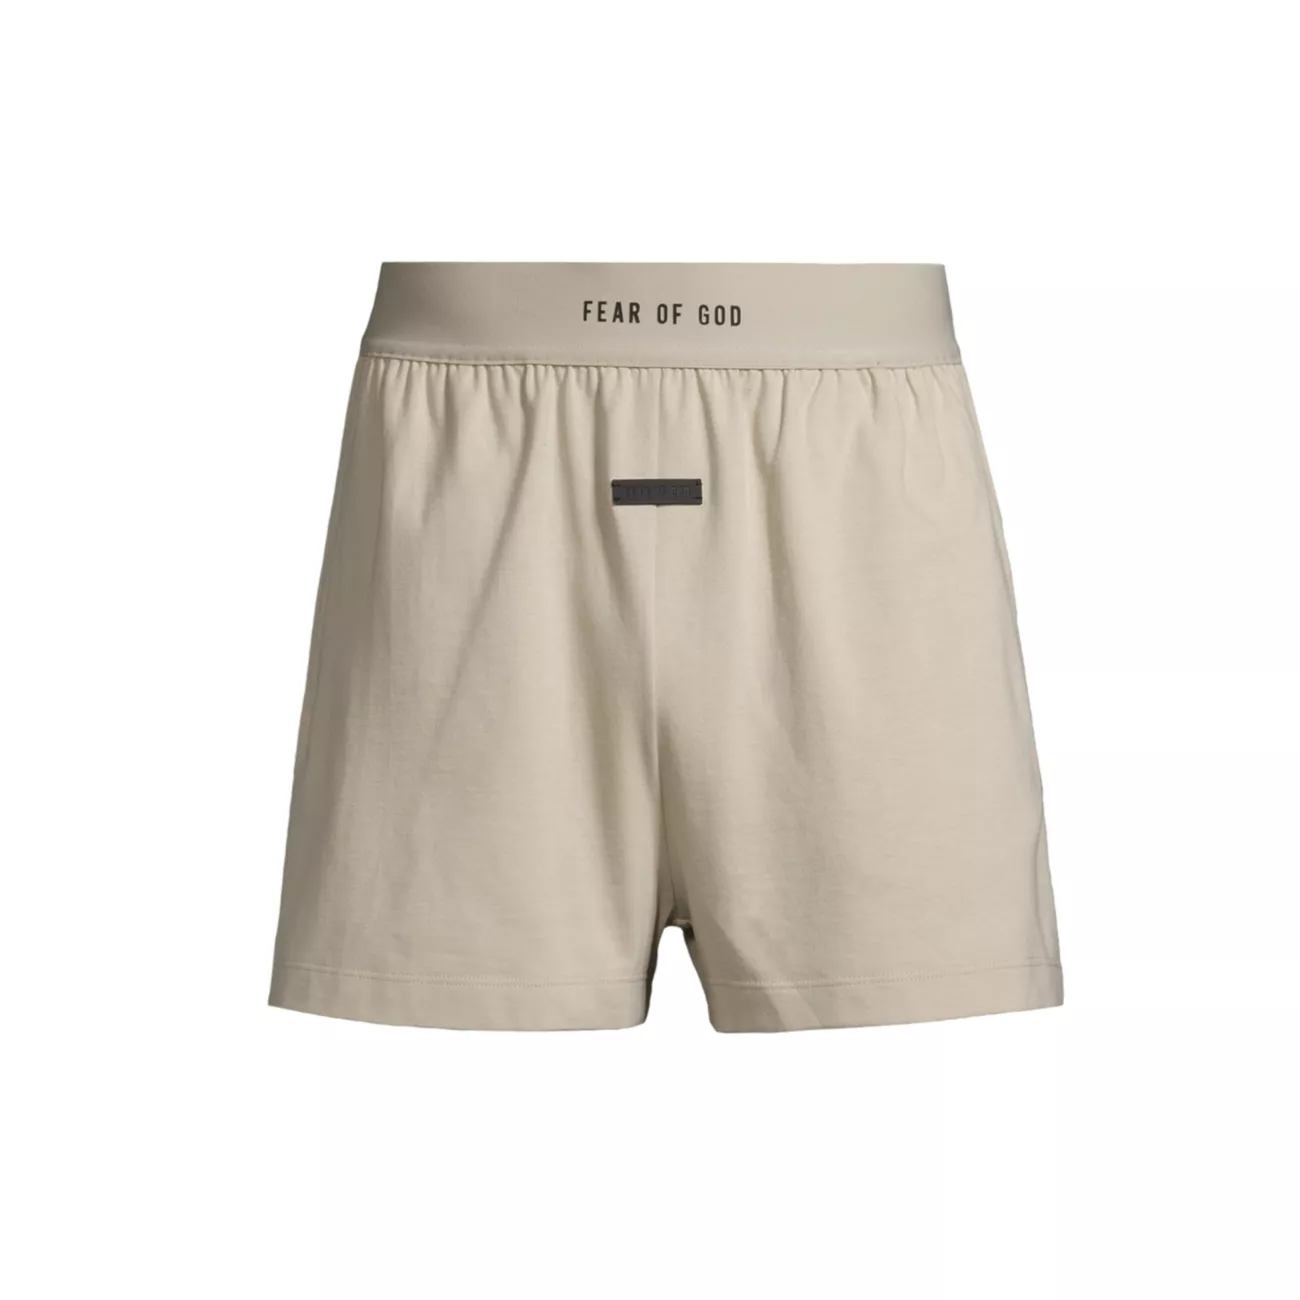 Cotton Lounge Shorts FEAR OF GOD